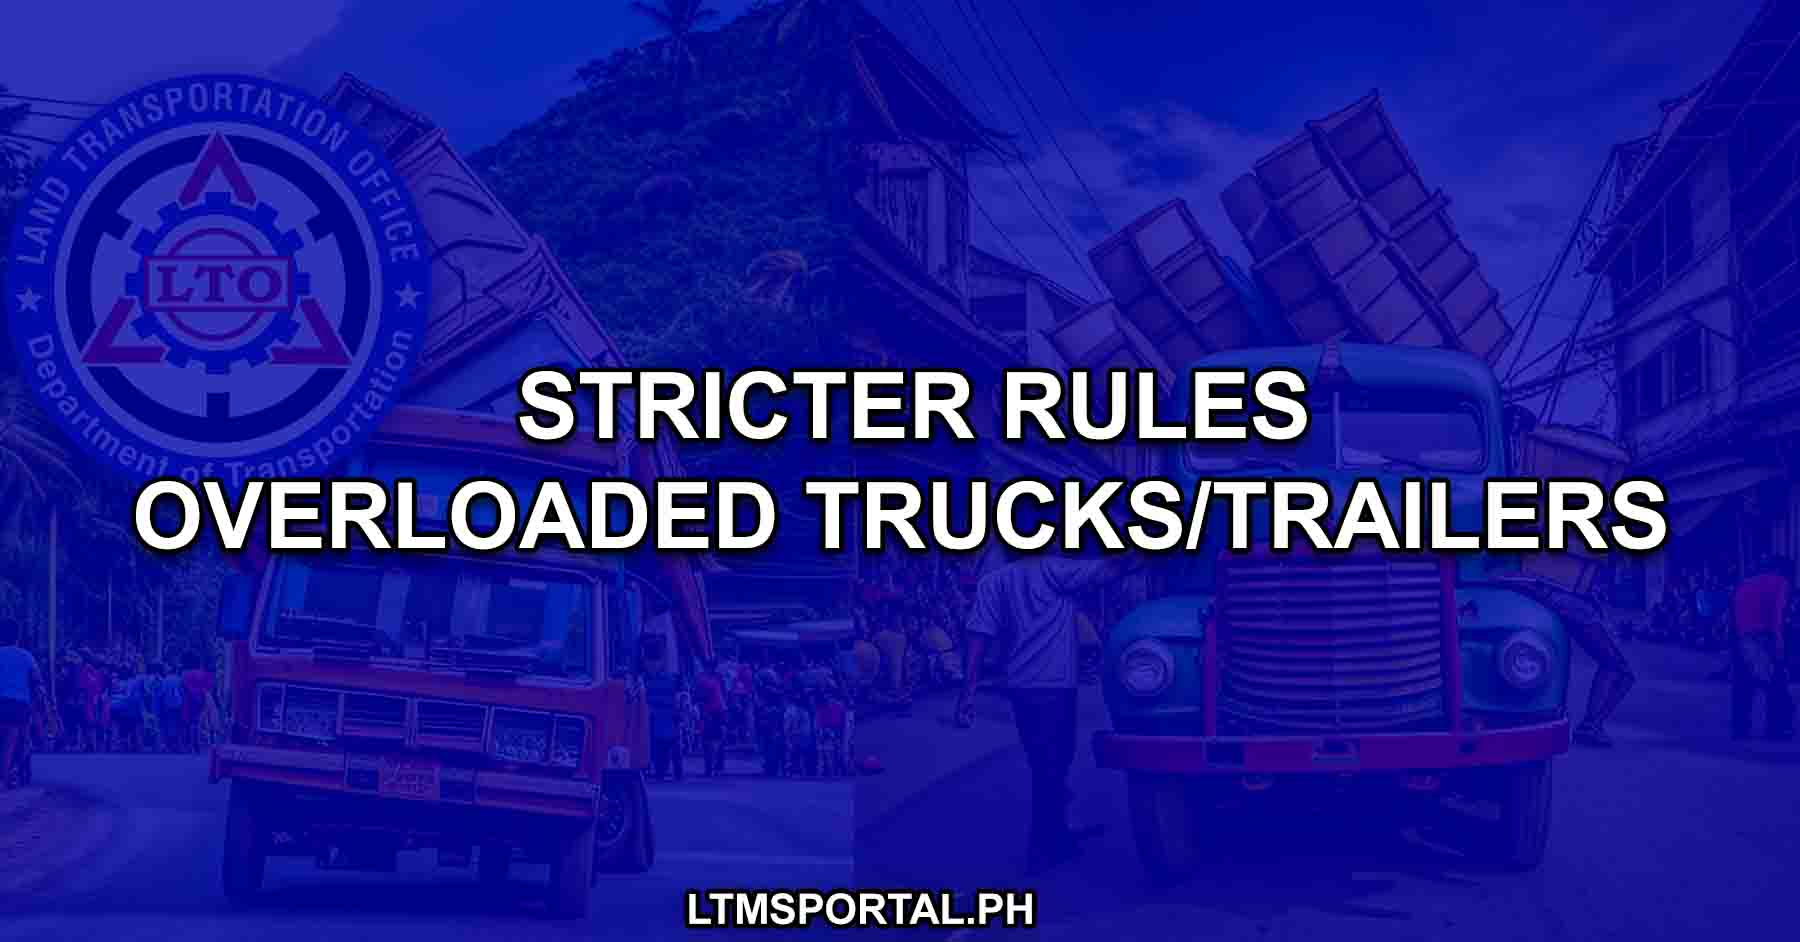 lto imposes stricter rules on overloading trucks and trailers